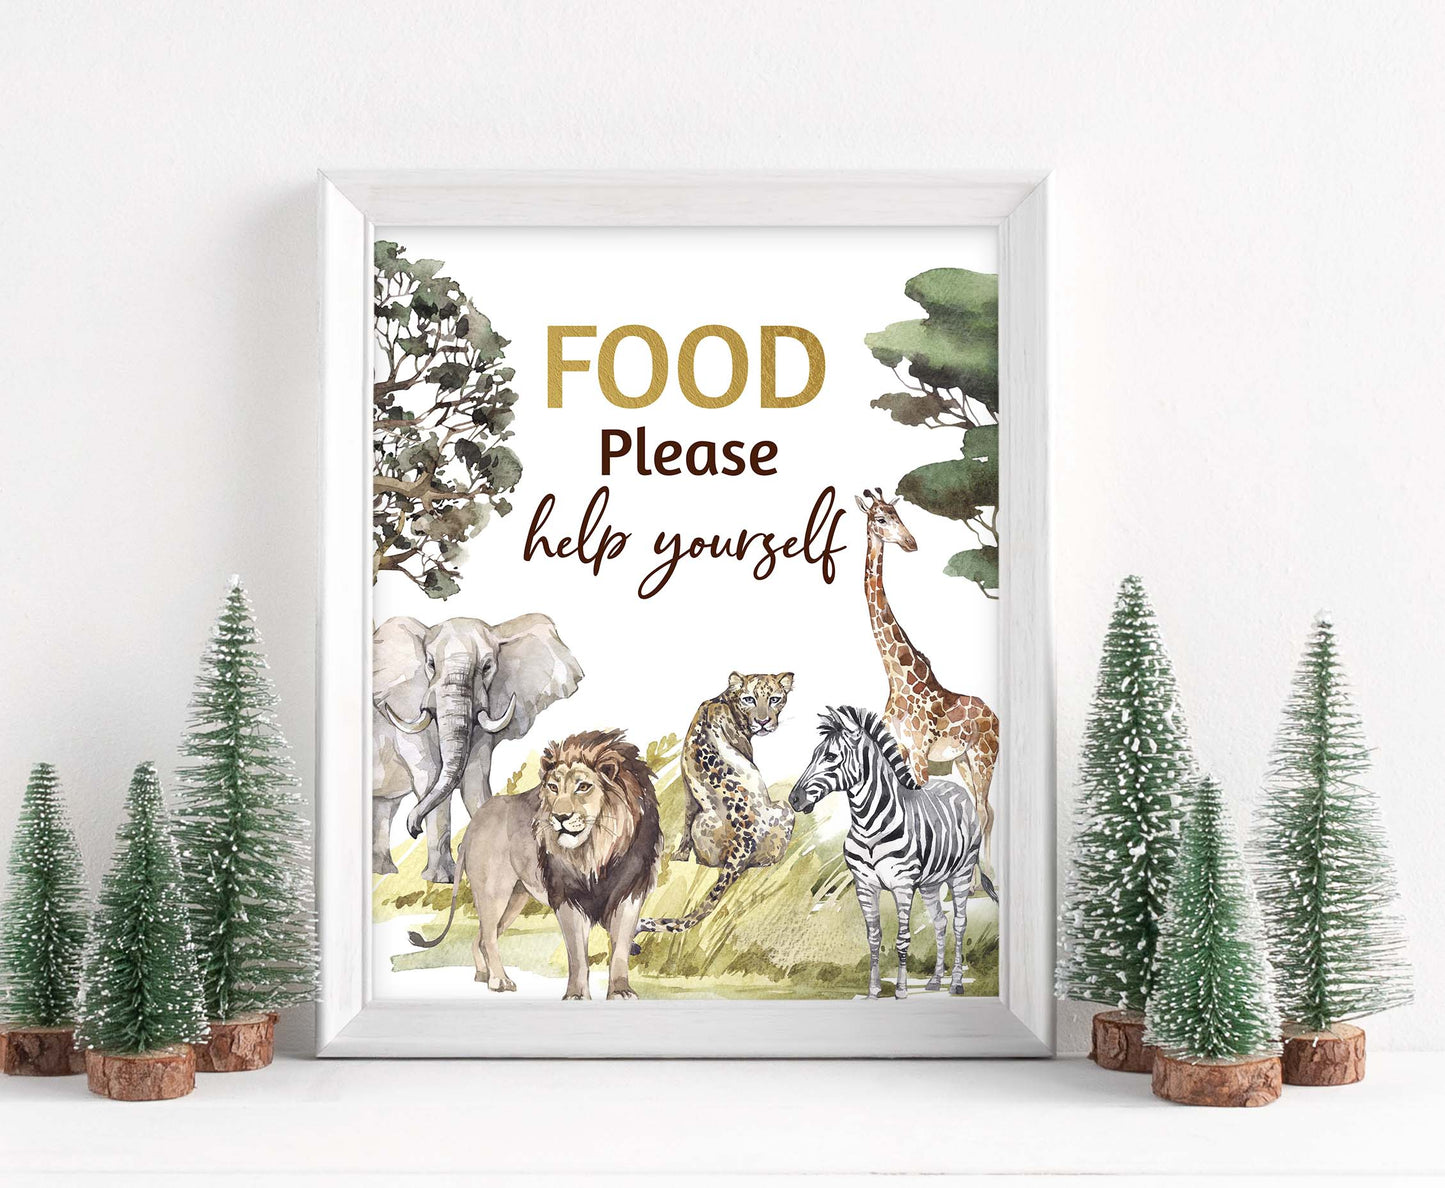 Safari Food Sign | Jungle Themed Party Table Decorations - 35I